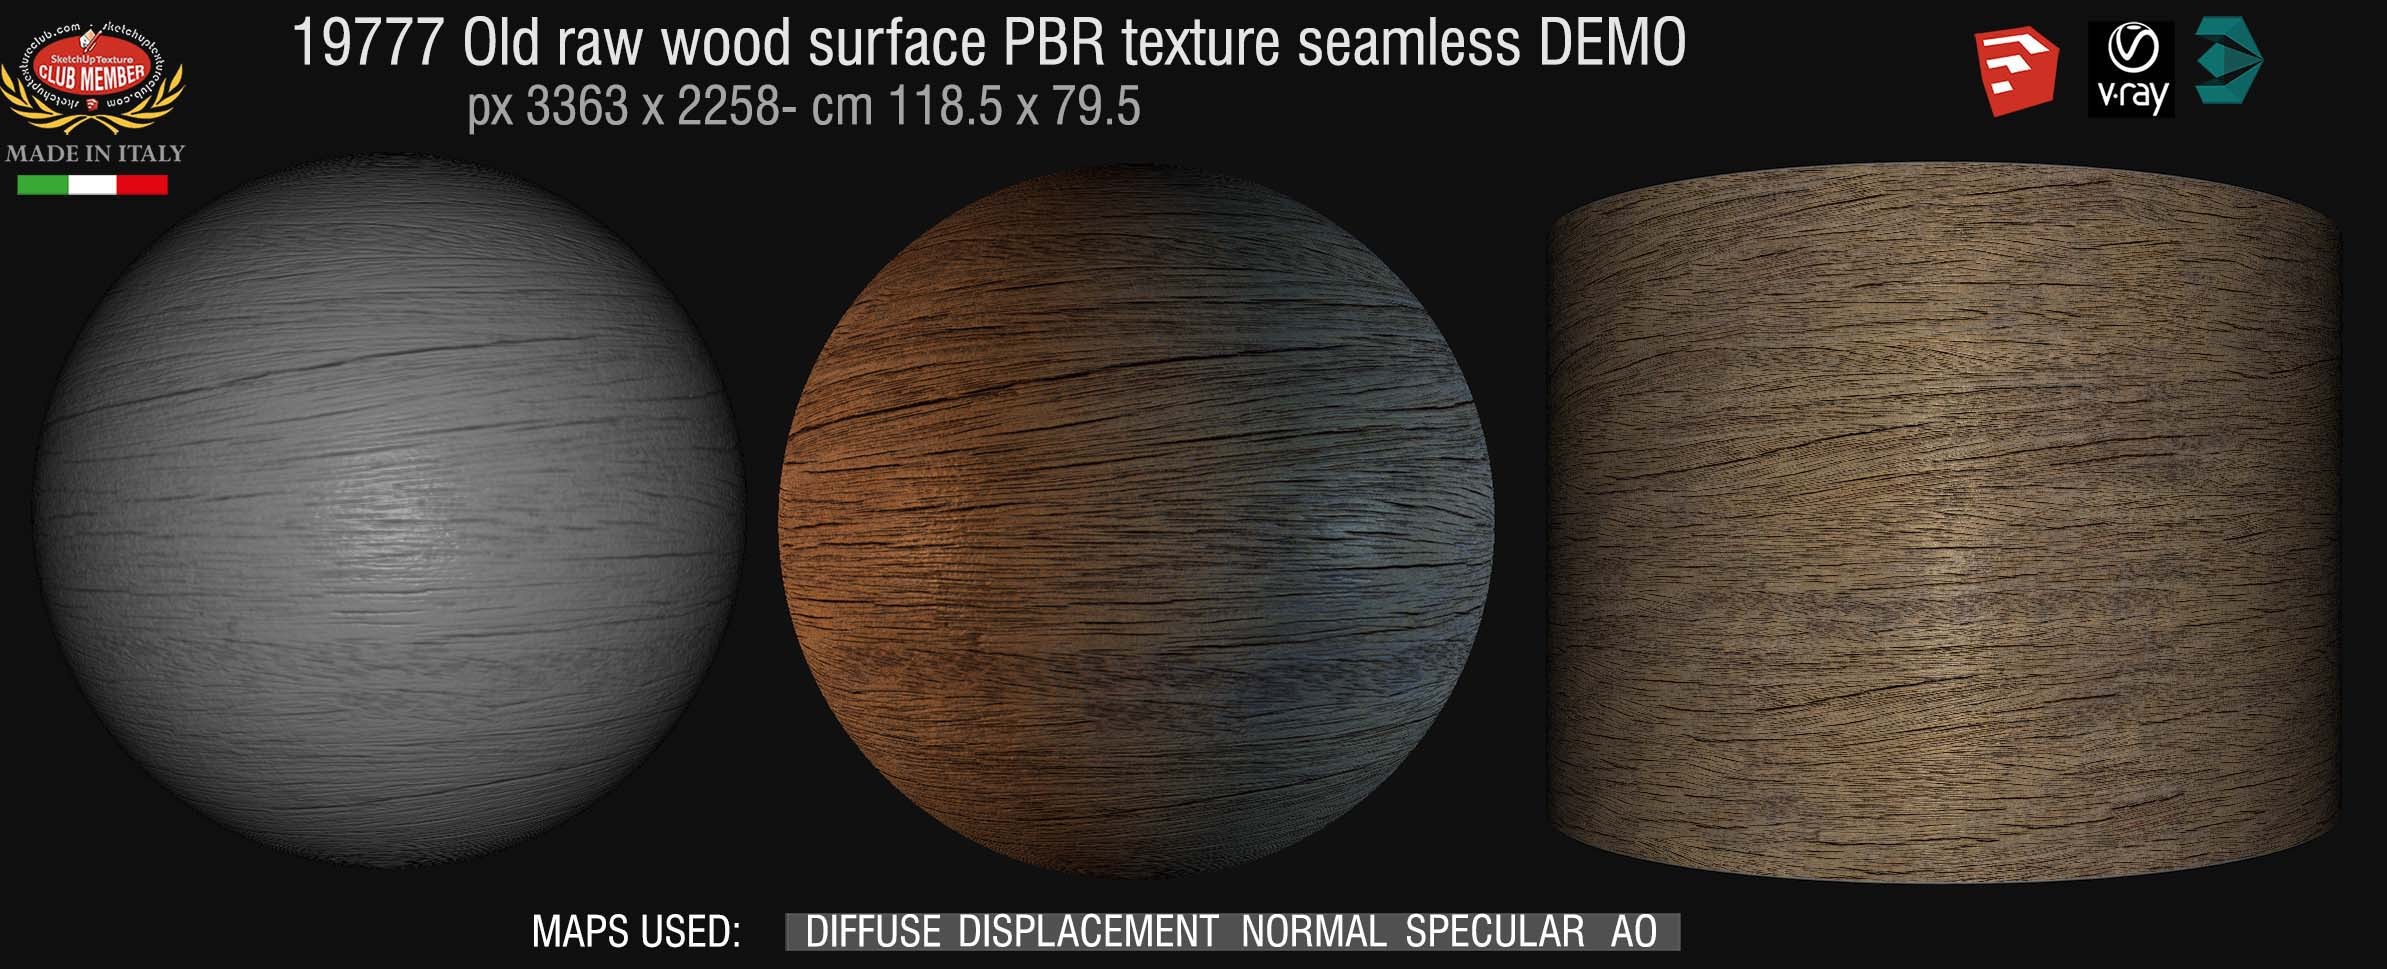 19777 Old raw wood PBR texture seamless DEMO